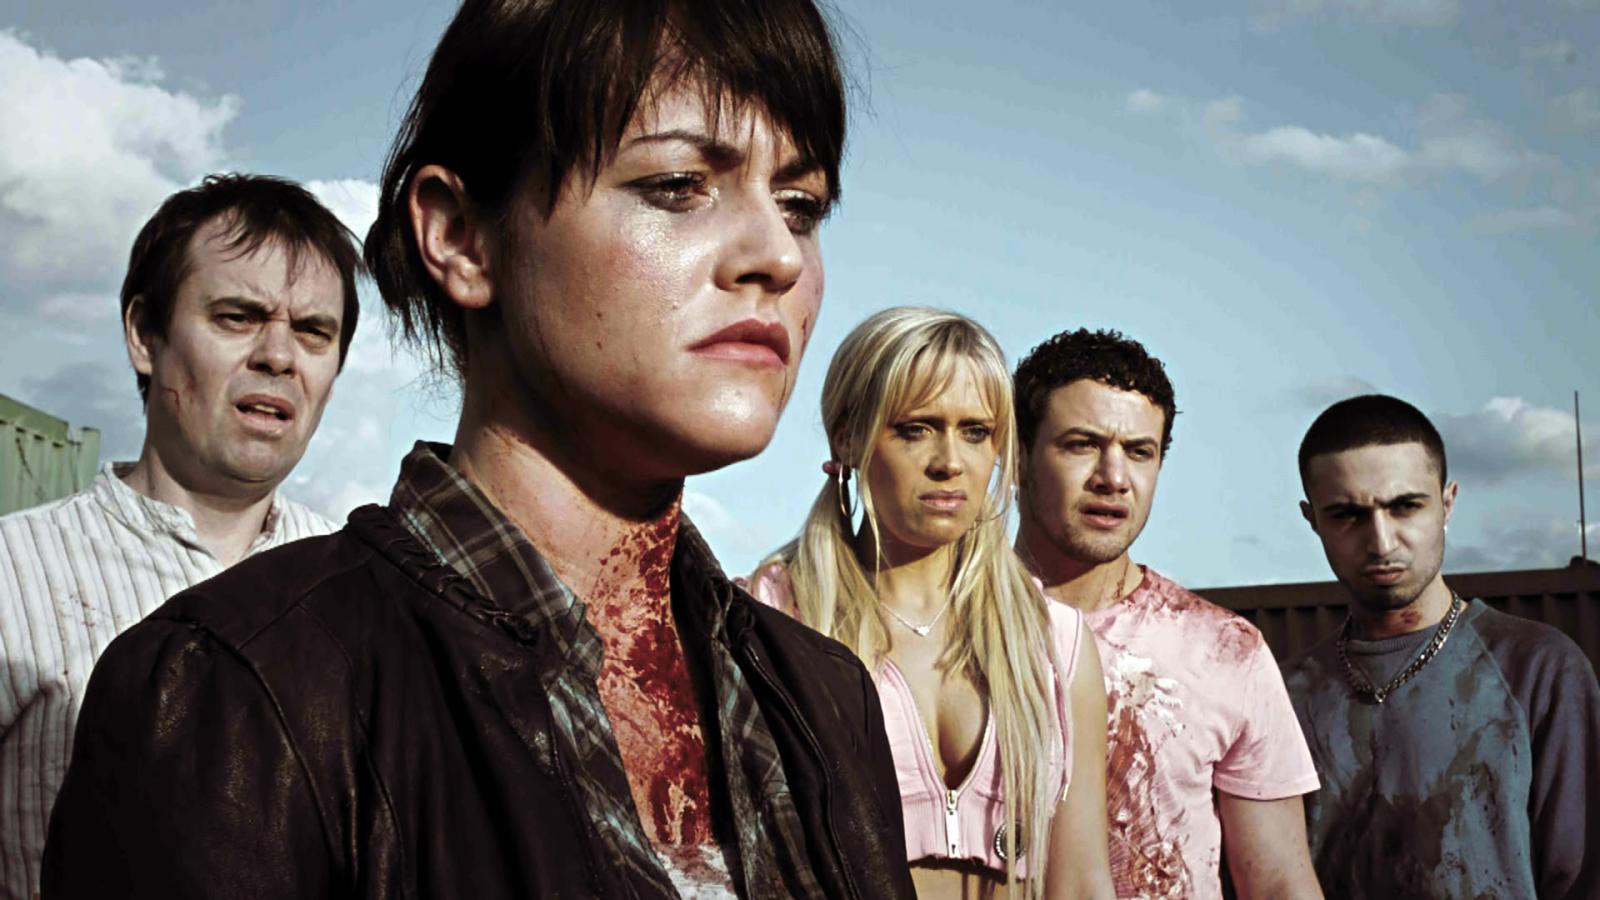 15 Overlooked Mini-Series You Can Binge in a Weekend - image 4